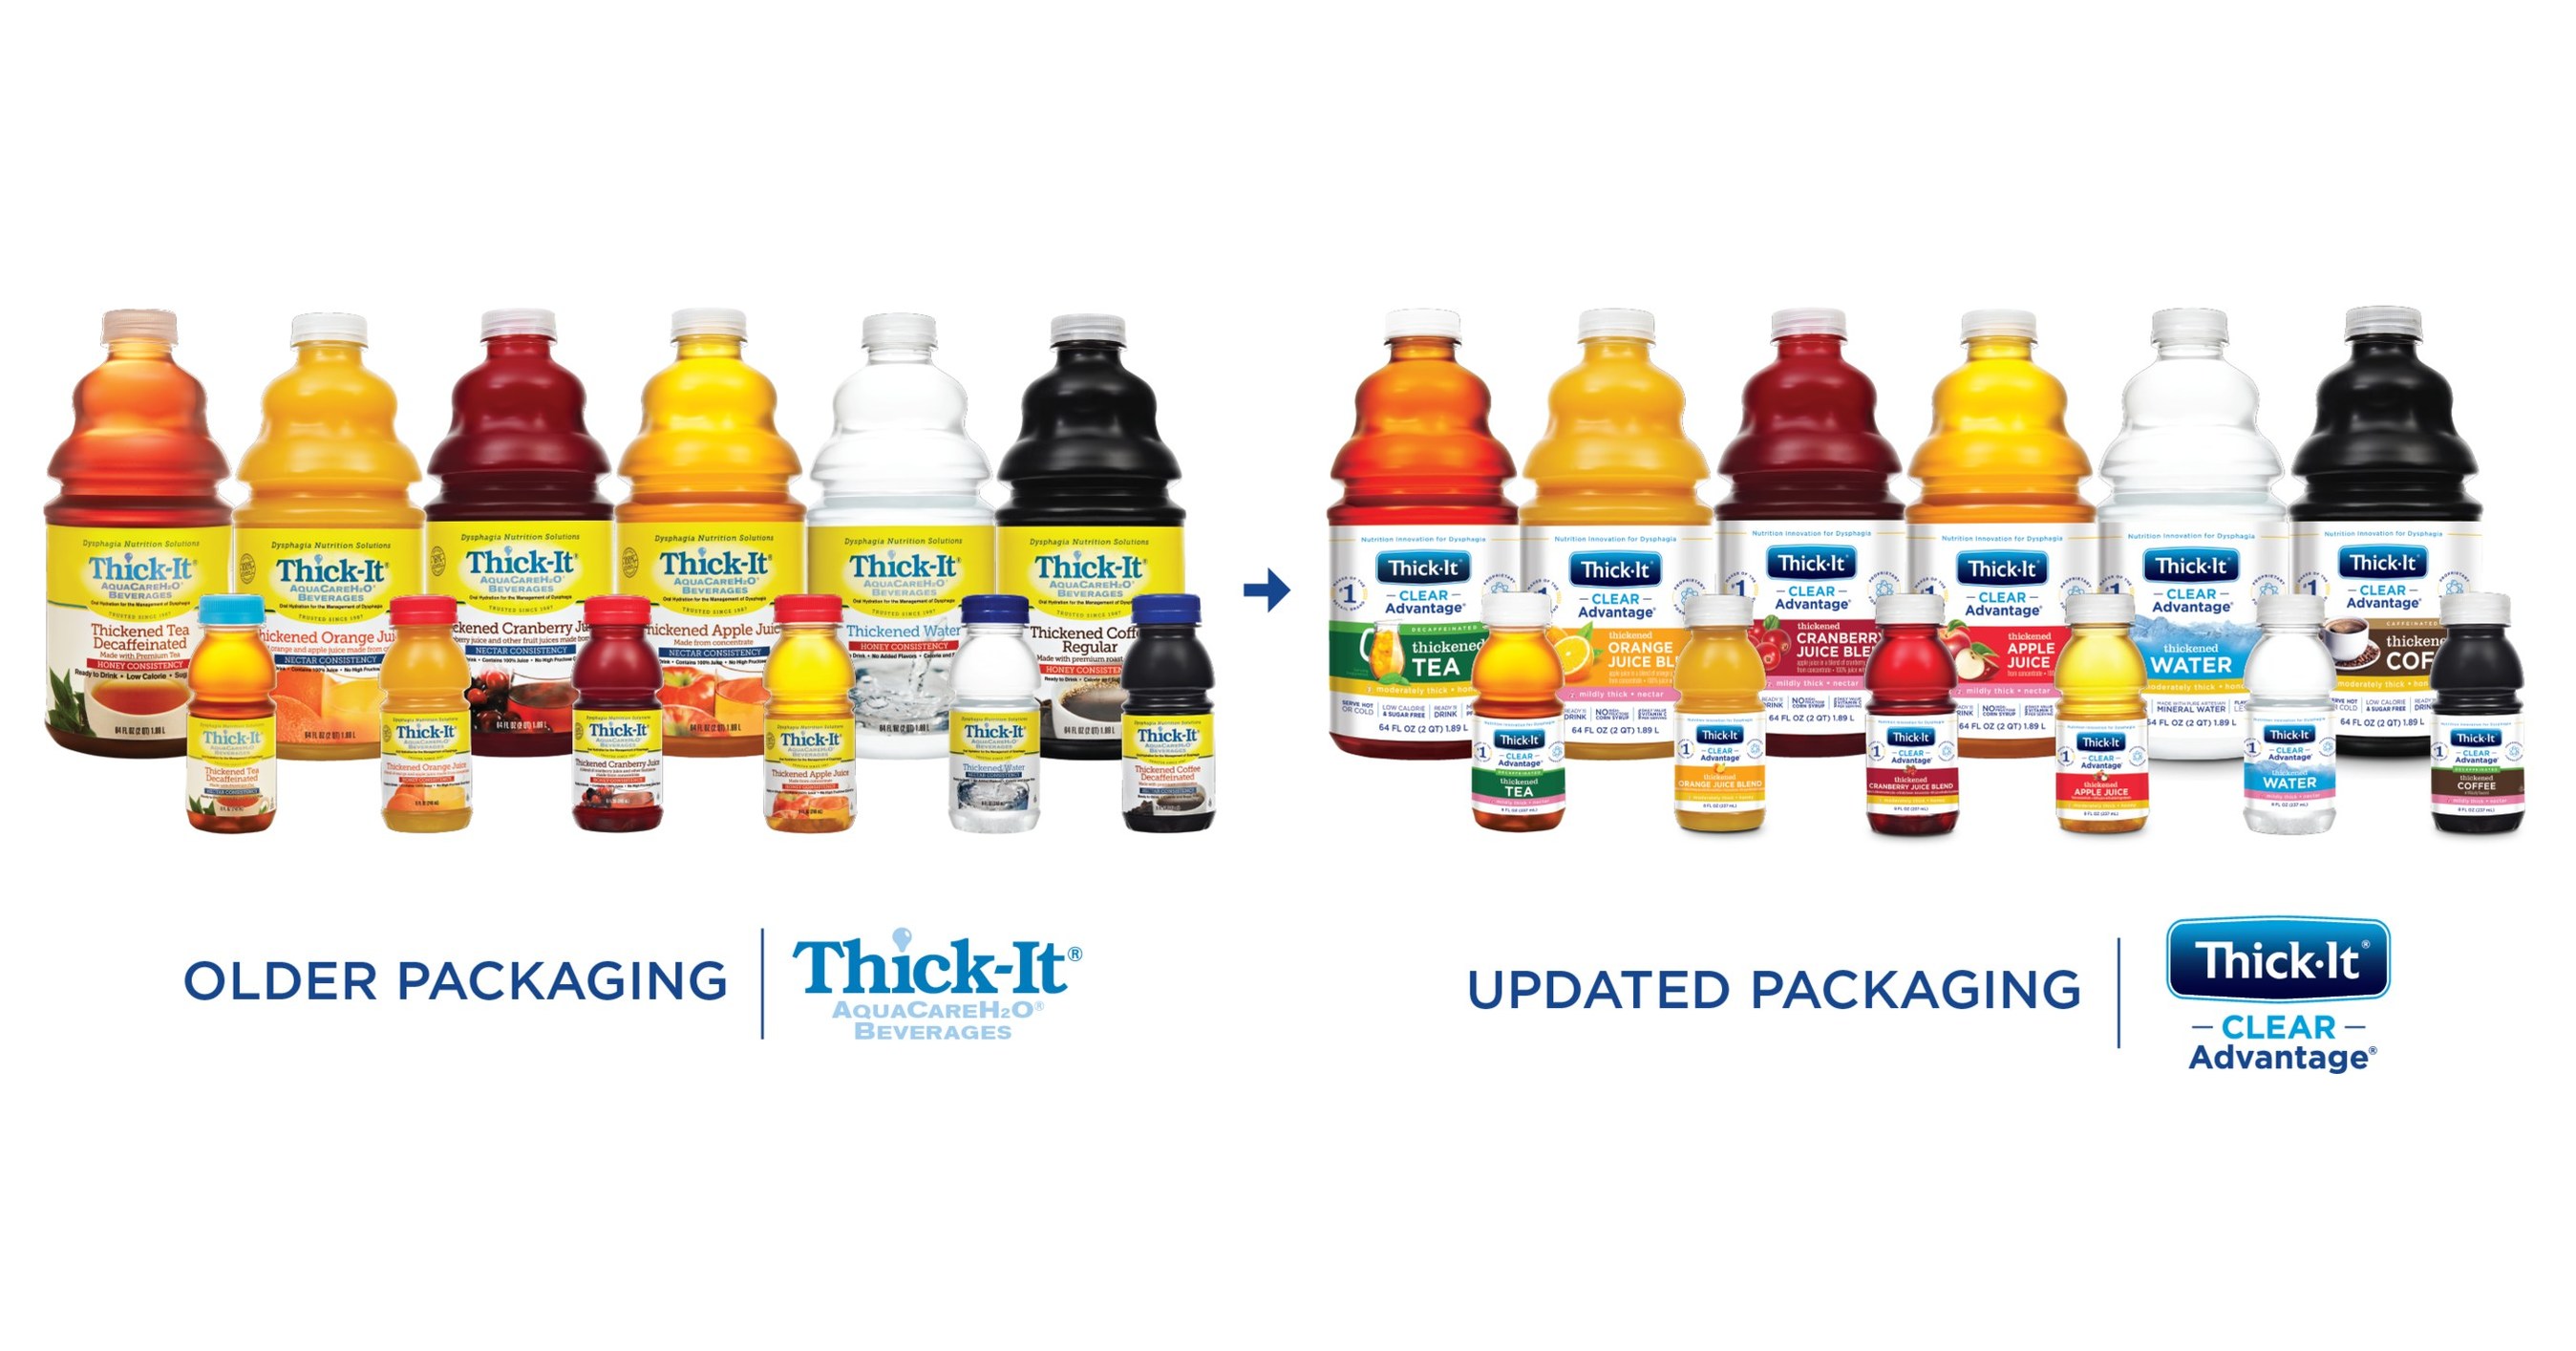 Thick-It® Brand Unveils New Name, Packaging for Ready-to-Drink